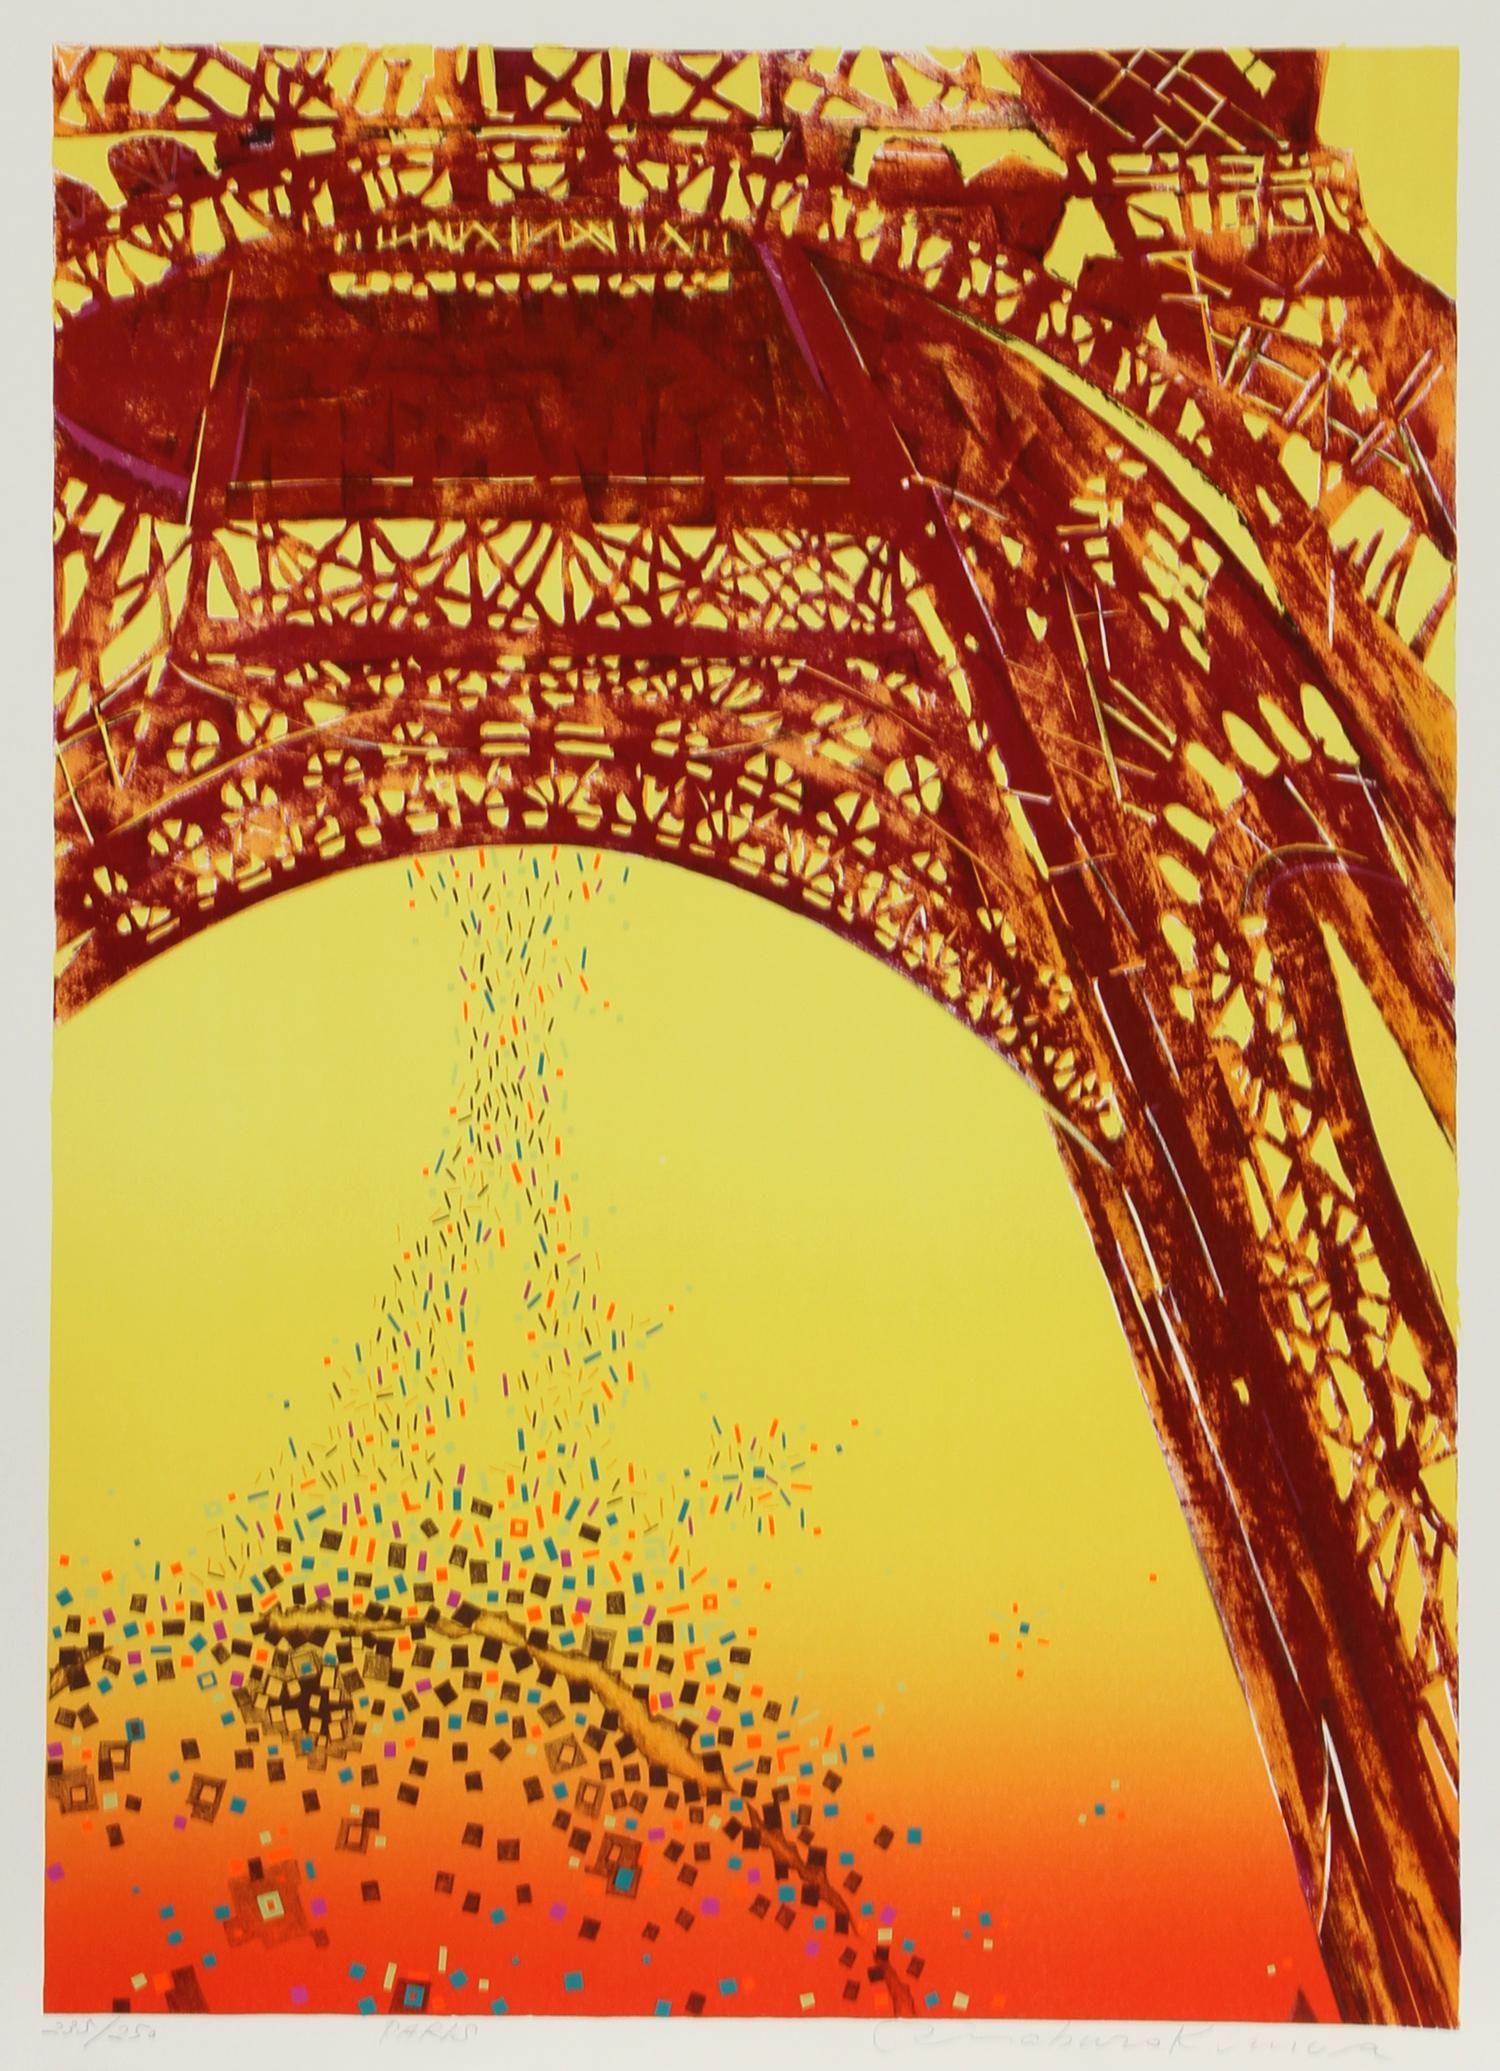 Artist: Risaburo Kimura, Japanese (1924 - )
Title: Paris
Year: 1973
Medium: Silkscreen on BFK Rives, Signed, titled and numbered in pencil
Edition: 250, AP 20
Size: 30 in. x 22 in. (76.2 cm x 55.88 cm)

Printer: Shorewood Atelier
Publisher: